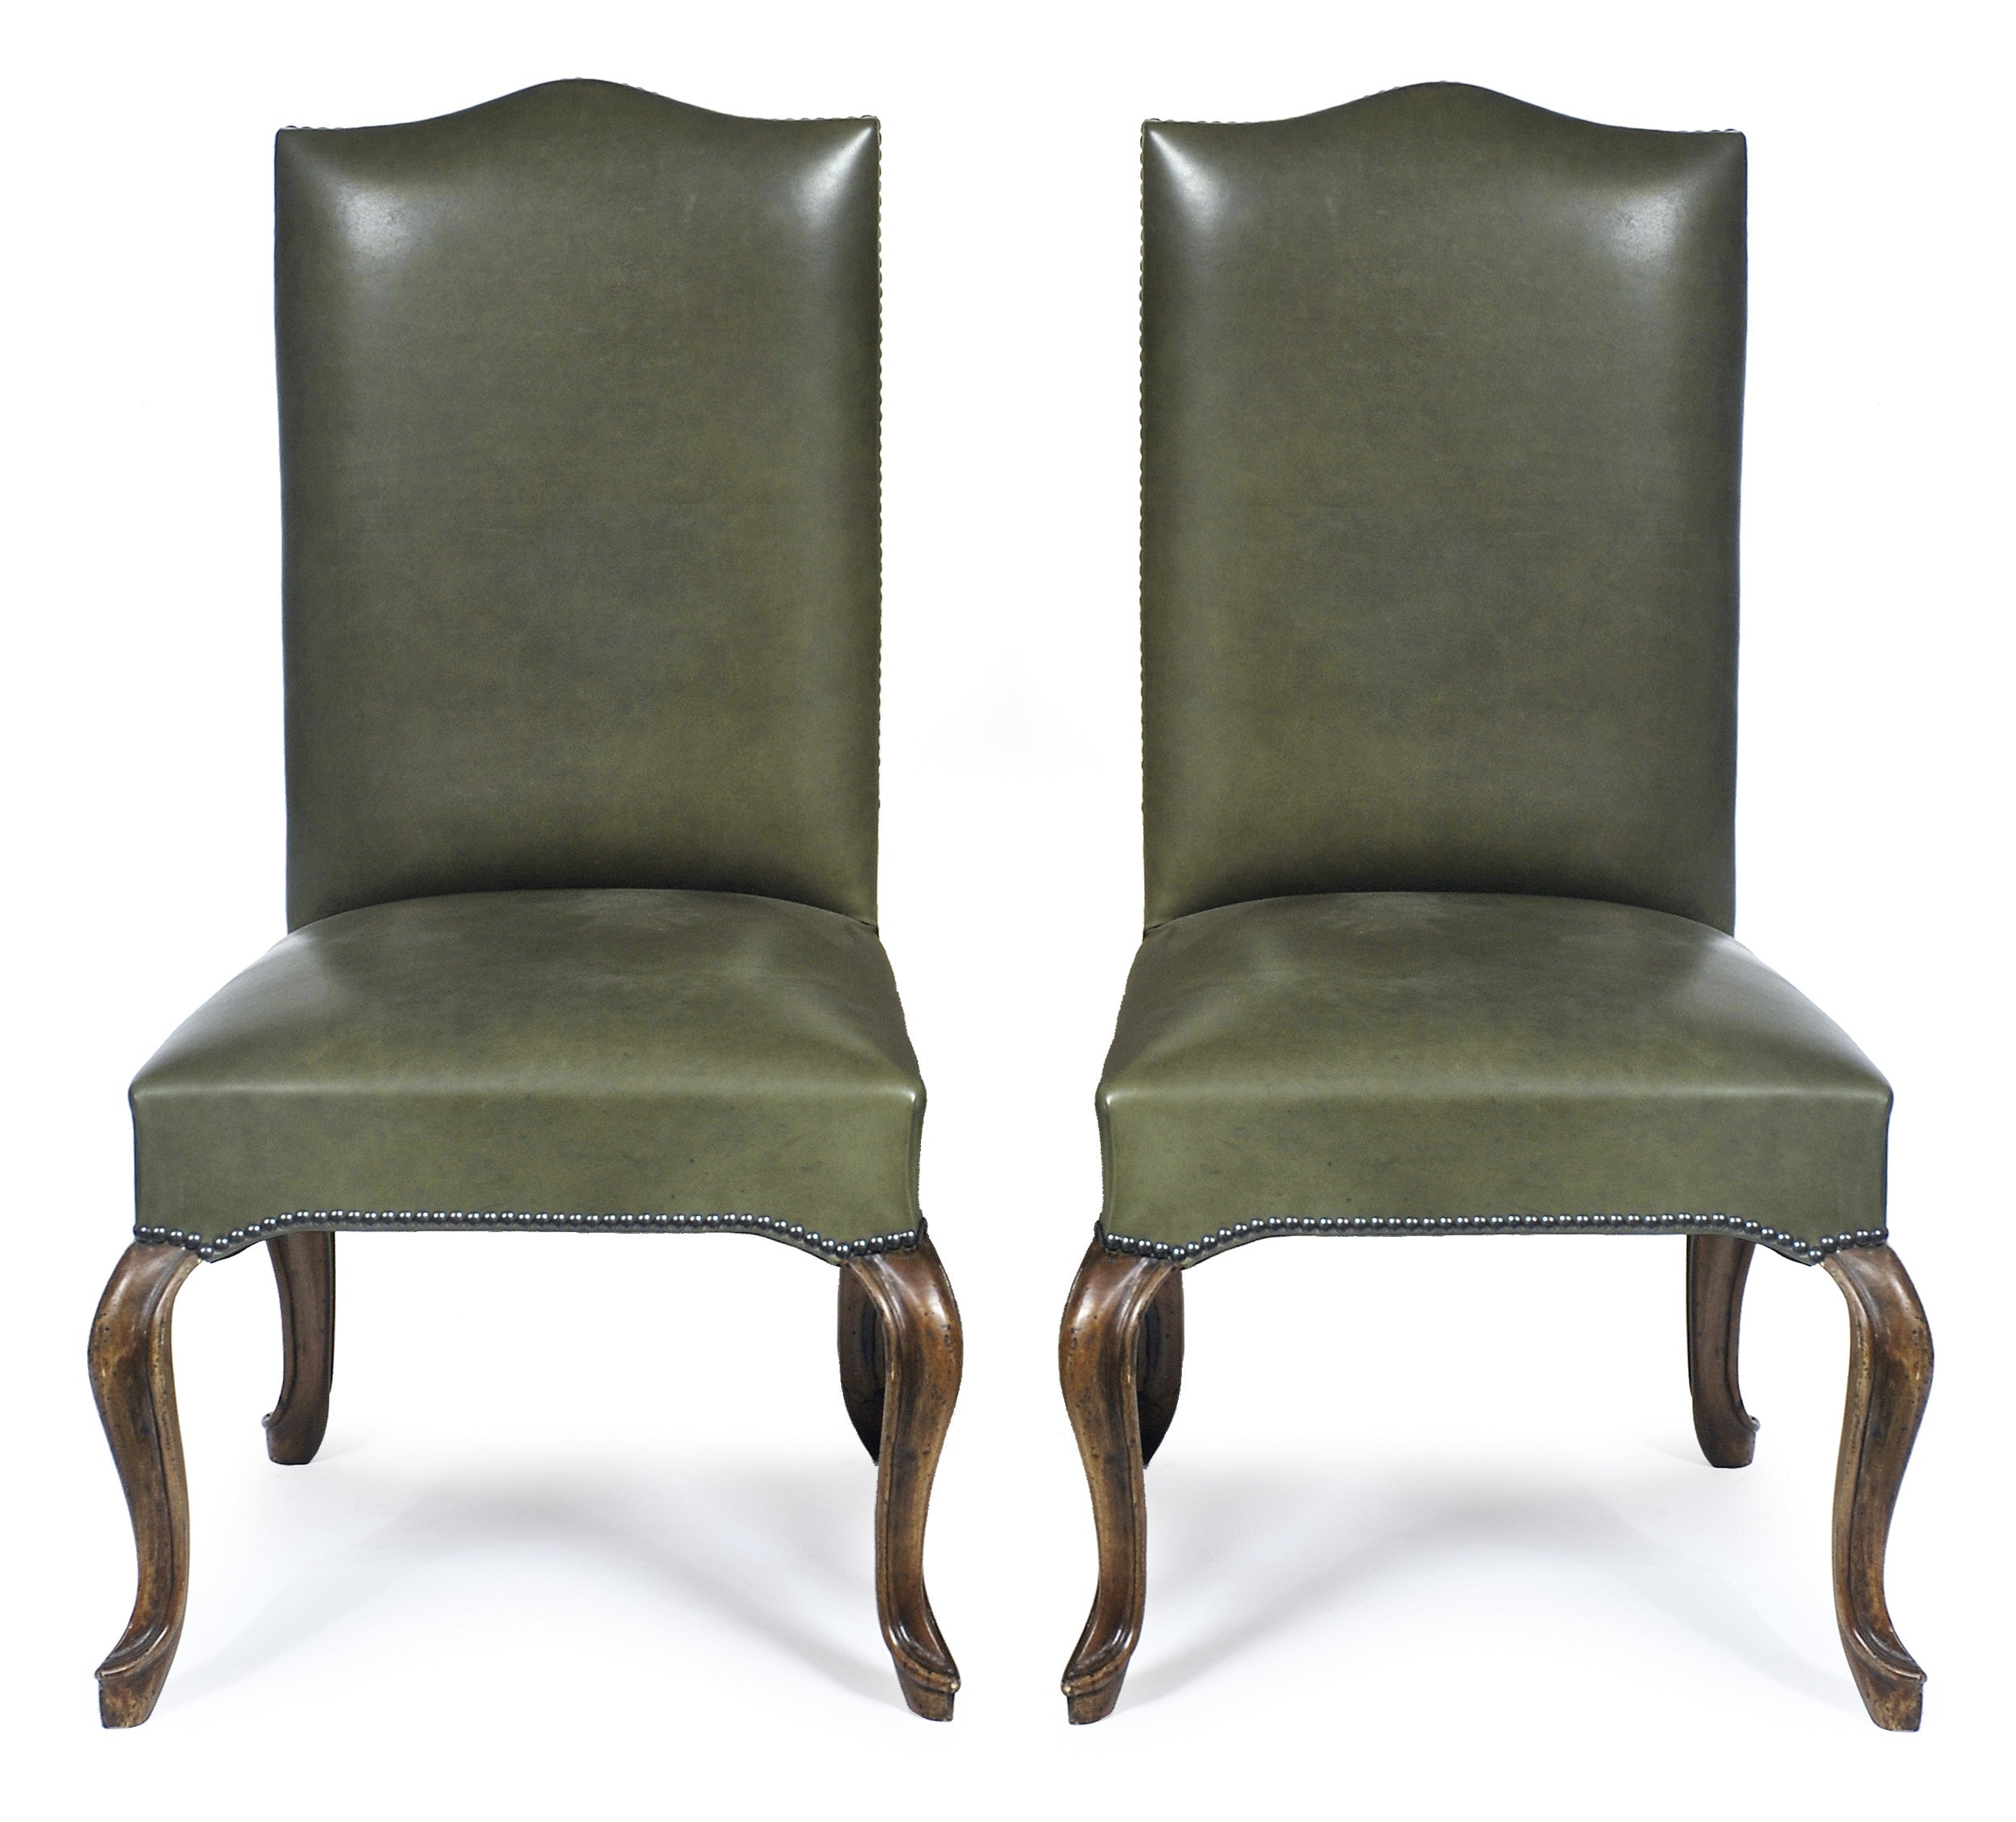 French Provincial Style Dining Chairs